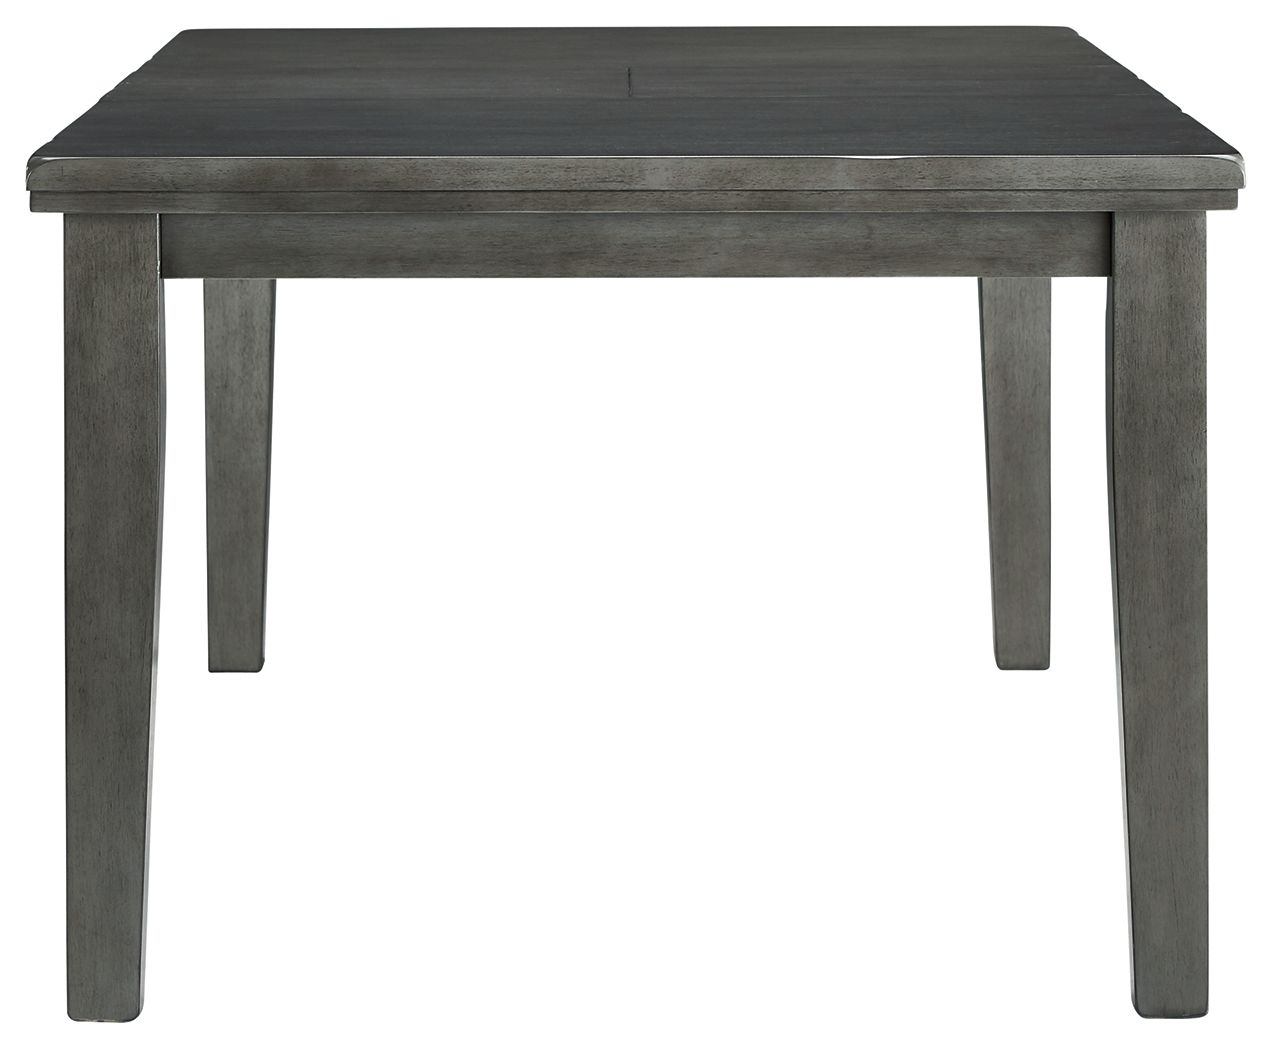 Hallanden - Gray - Rect Drm Butterfly Ext Table